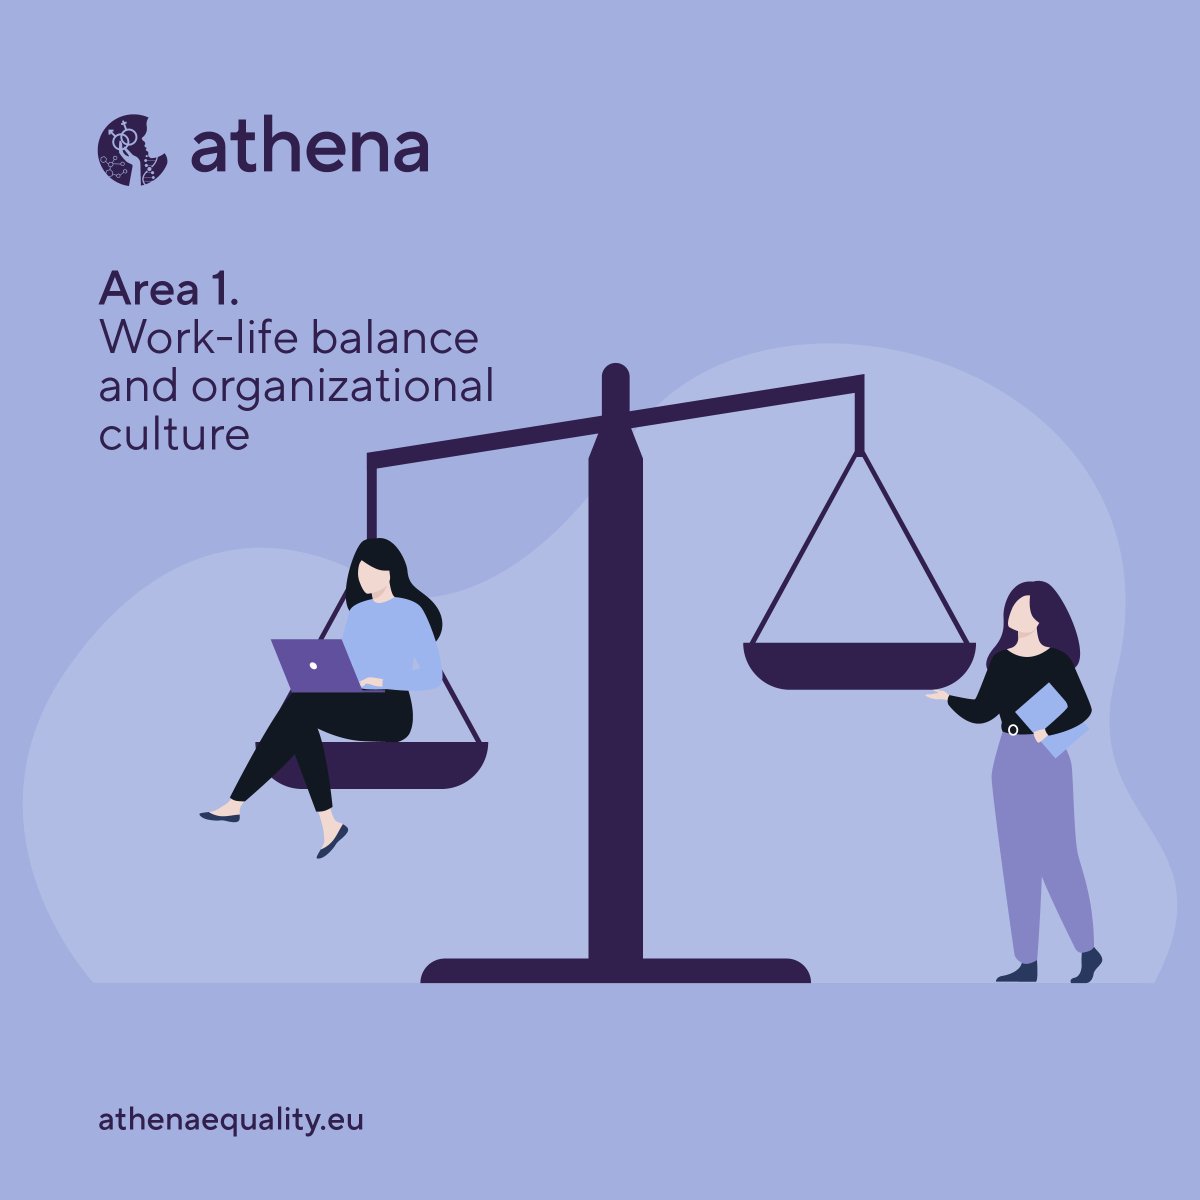 All institutions should consider how #worklifebalance and #organizationalculture affect #genderequality! That's why we're excited to share with you today one of the thematic areas of our toolkit ➡️ 'Work-life balance and organizational culture' ⚖️ 🔗bit.ly/3CBTBUe